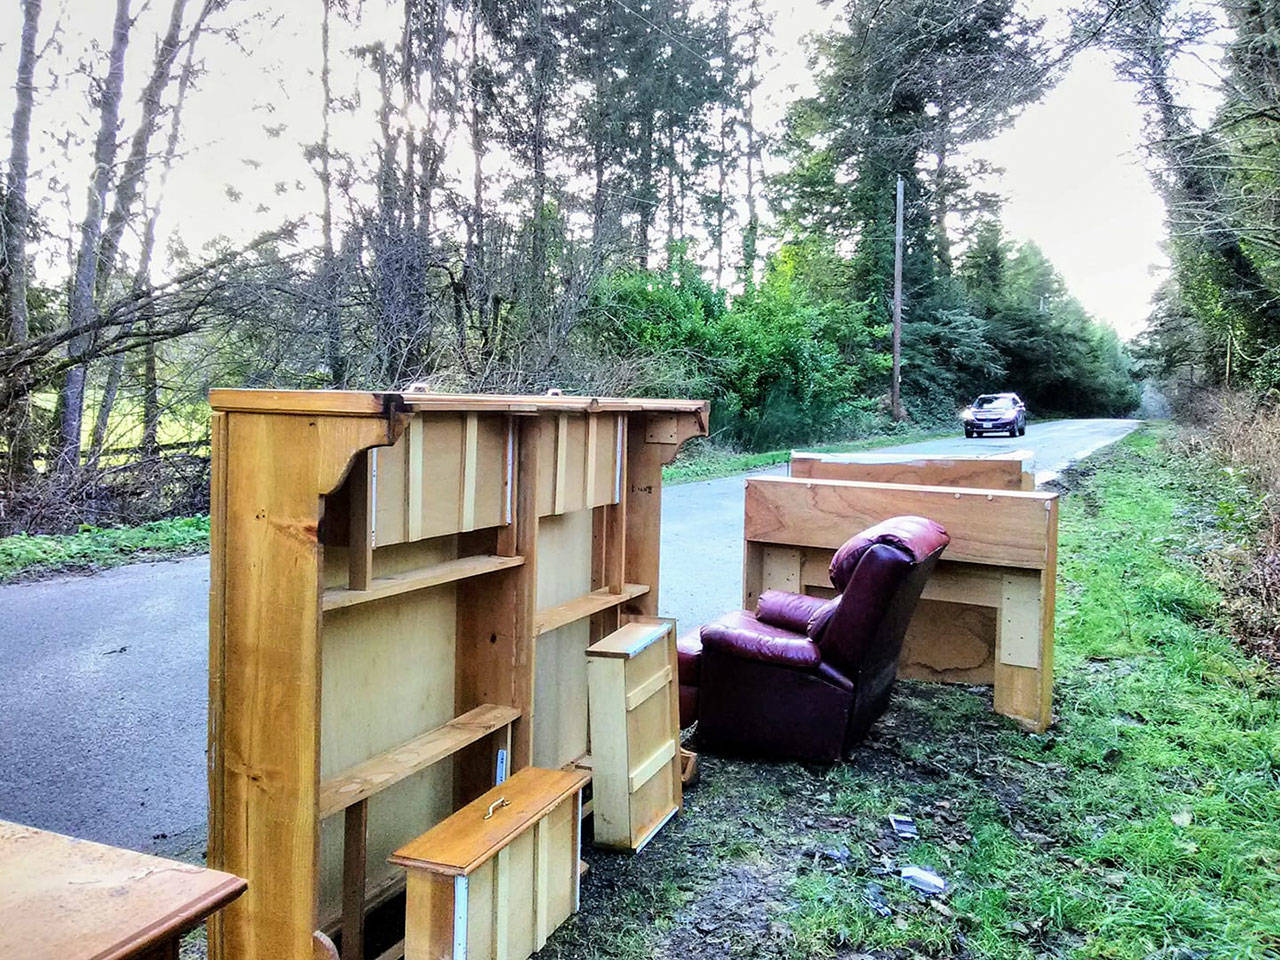 Furniture recently left on the side of Old Mill Road near Misty Isle Farms. The Vashon Park District has had to contend with a rise in illegal dumping in its properties (Paul Rowley/Staff Photo).